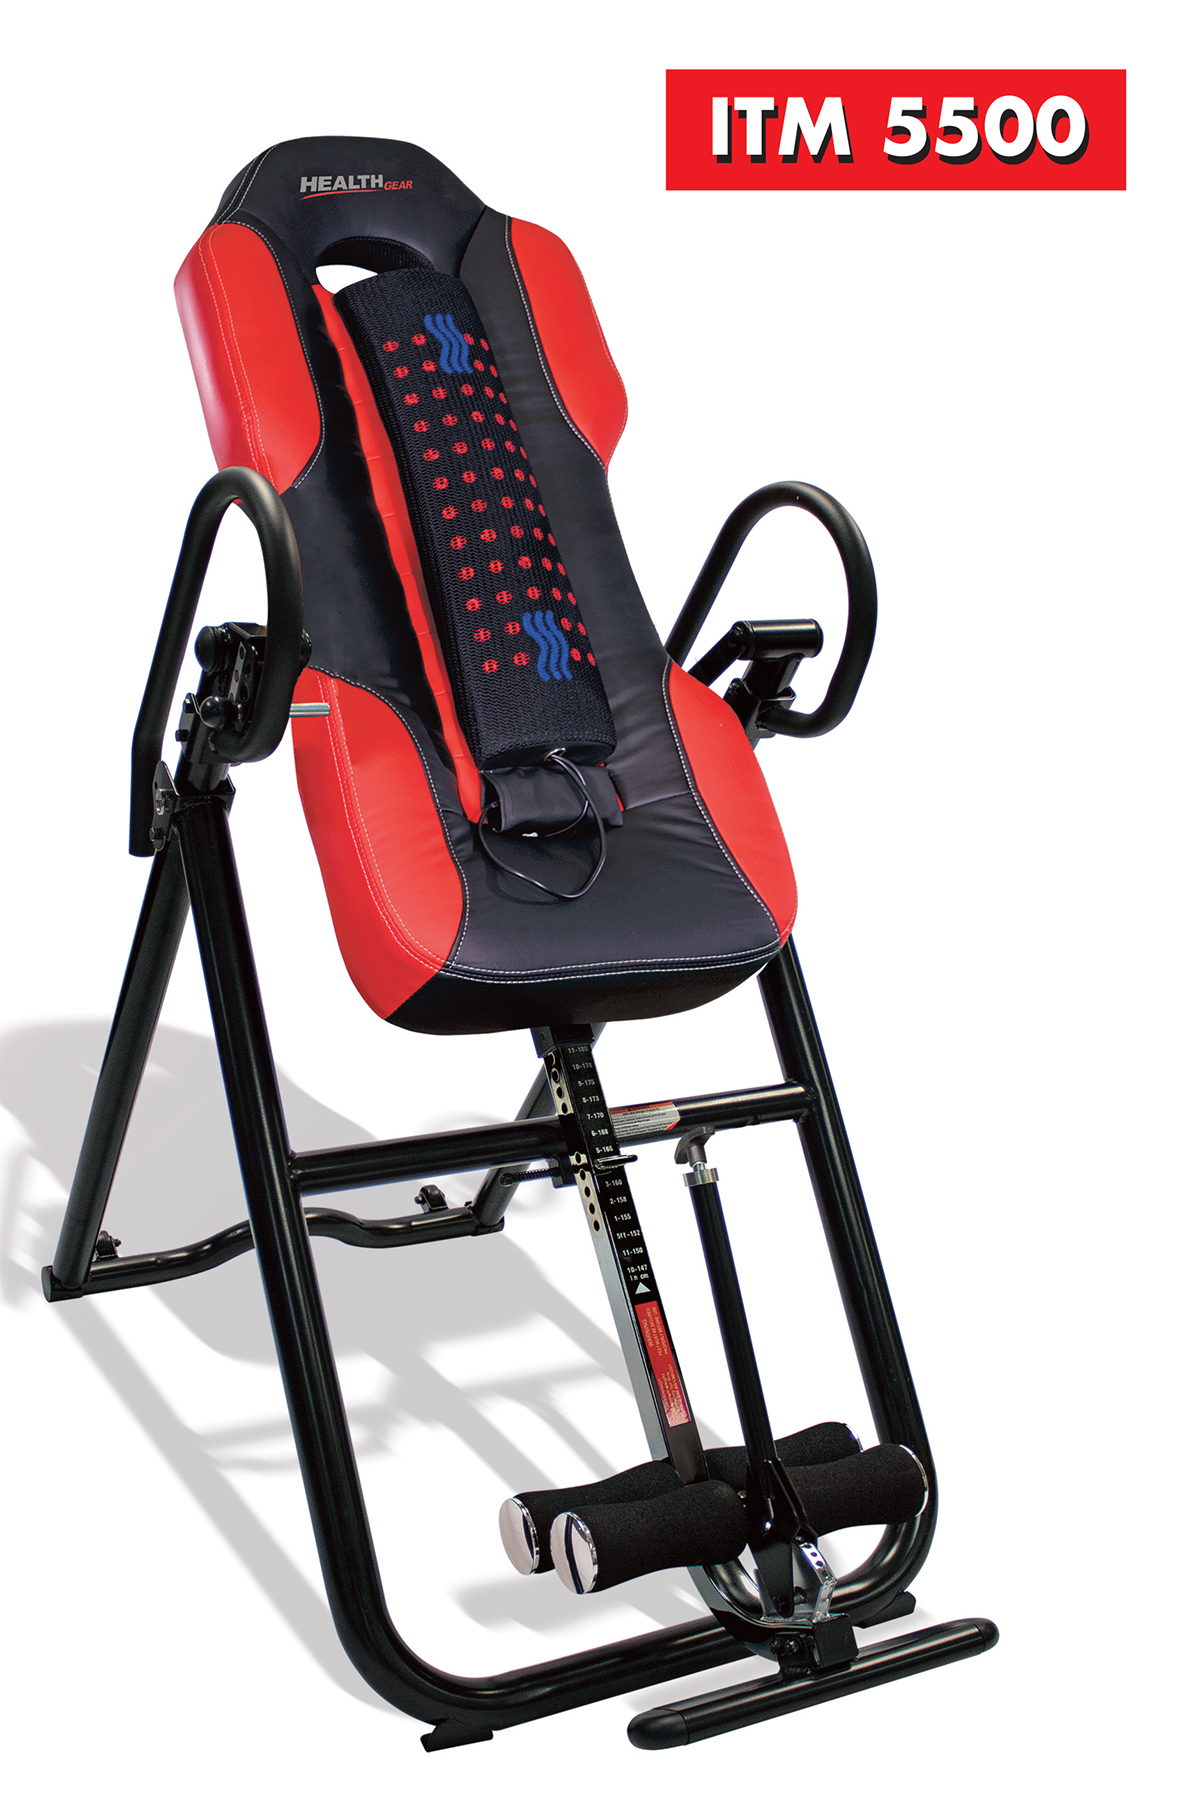 Health Gear ITM5500 Heat Massage Inversion Table - image 4 of 10